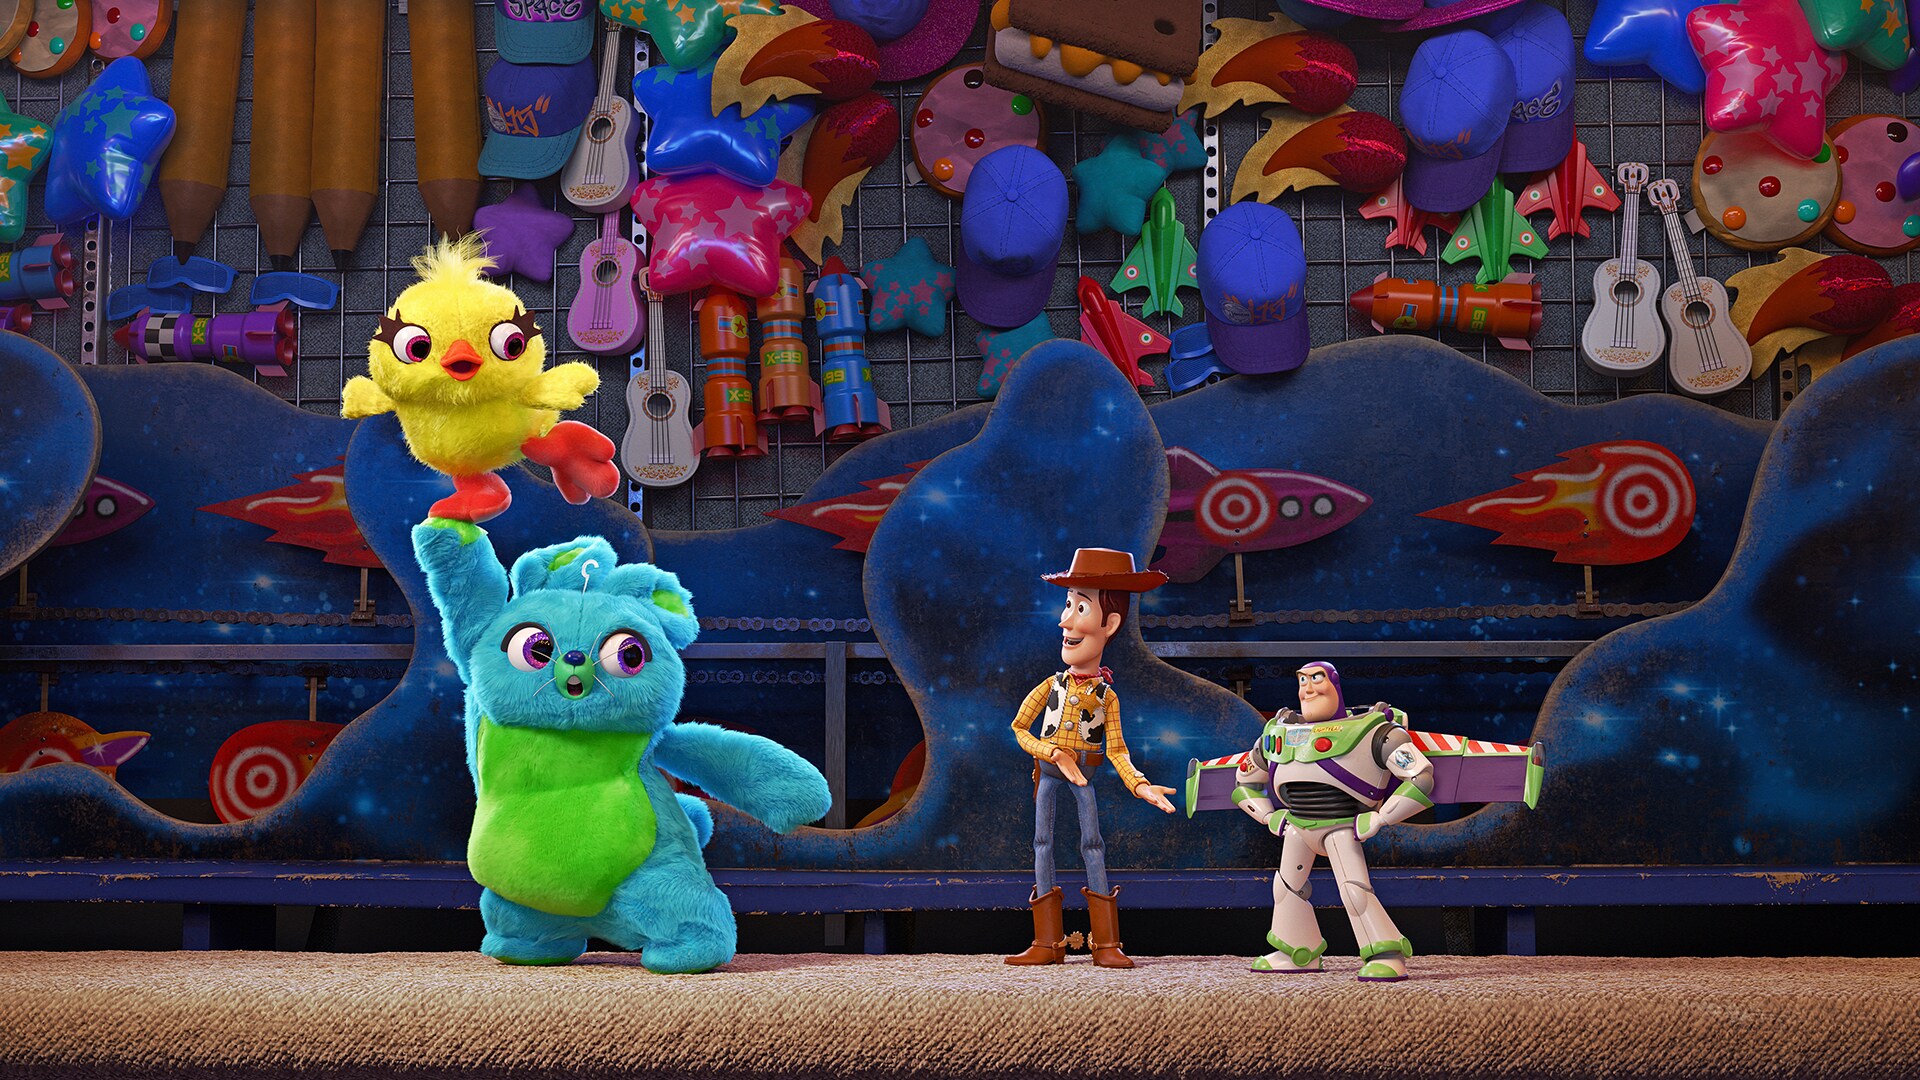 Four (or More) Fun Facts From Toy Story 4 You May Have Missed